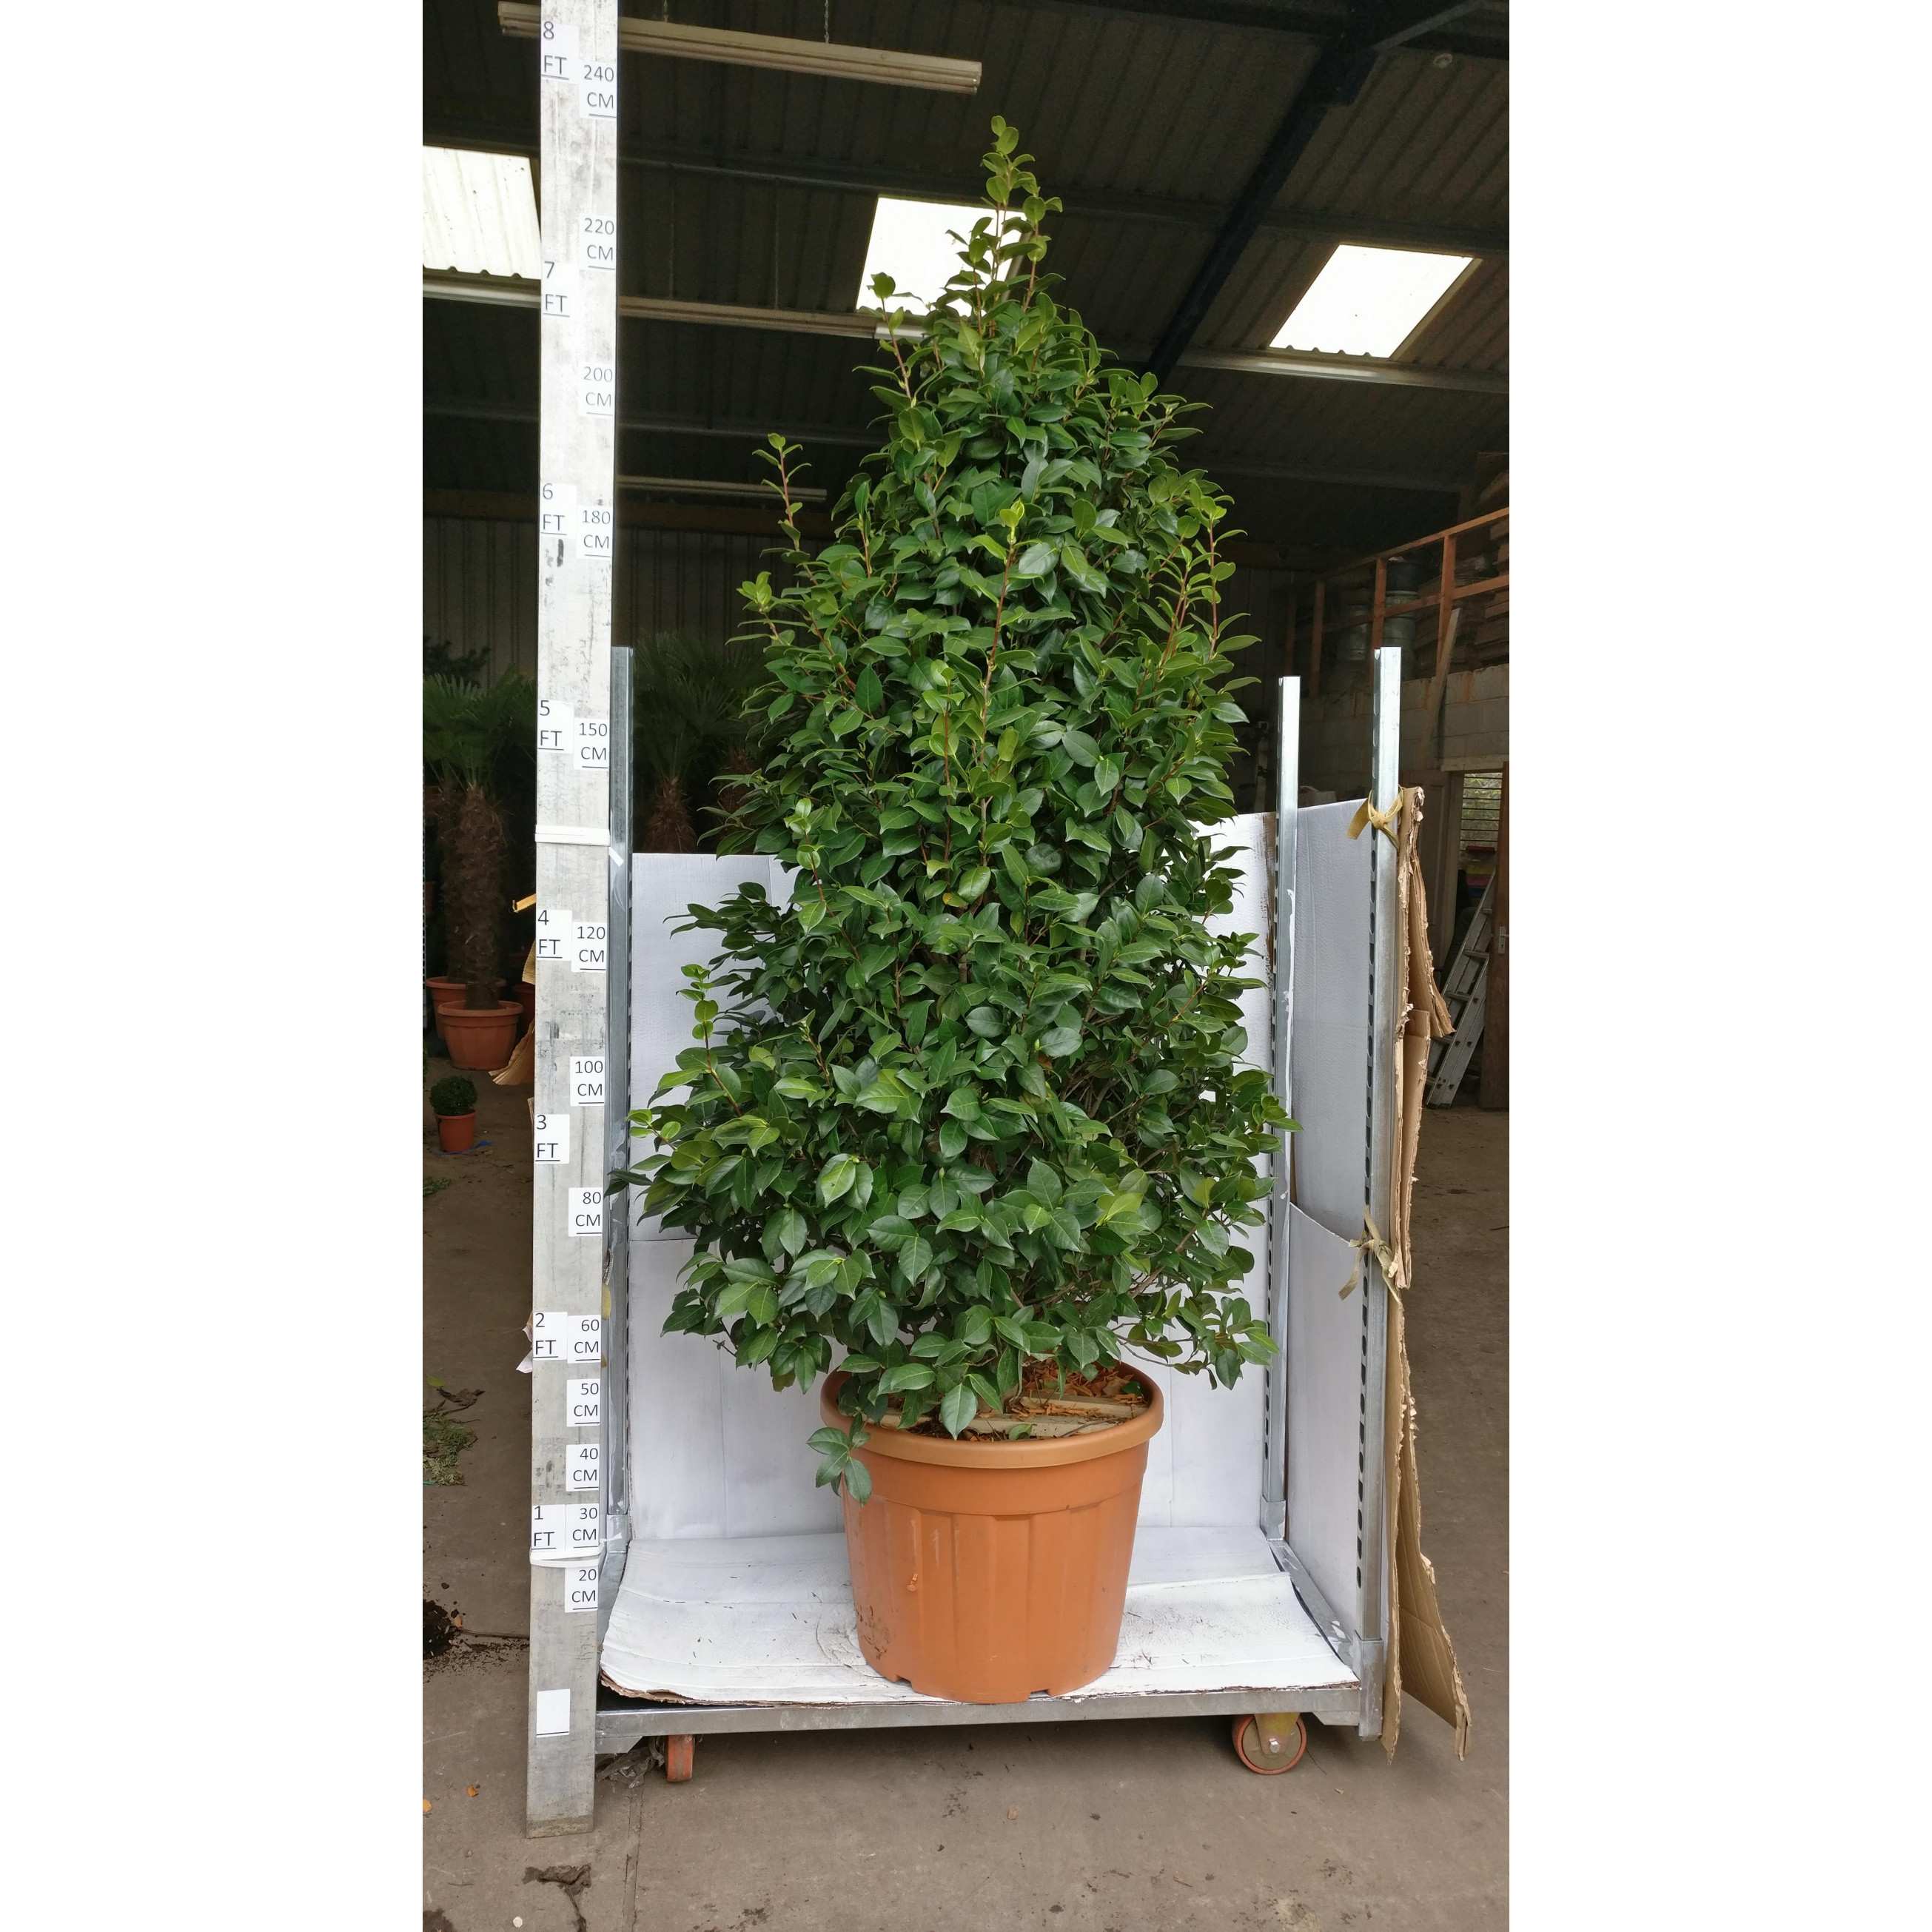 Camelia Japonica Large 8ft/240cm high including height of pot